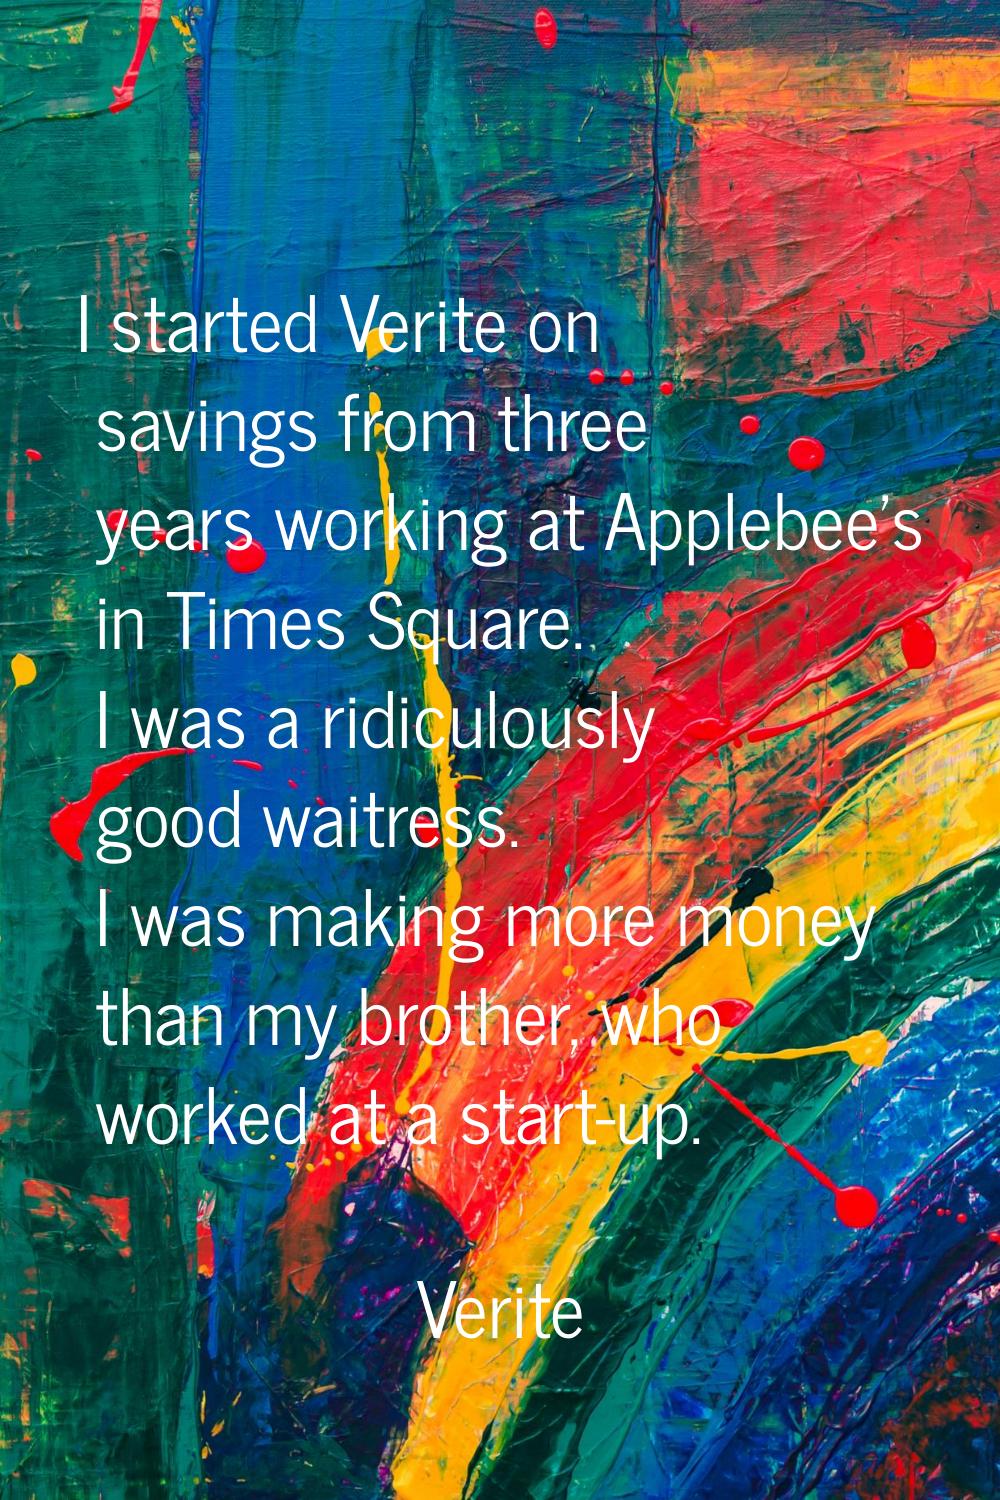 I started Verite on savings from three years working at Applebee's in Times Square. I was a ridicul